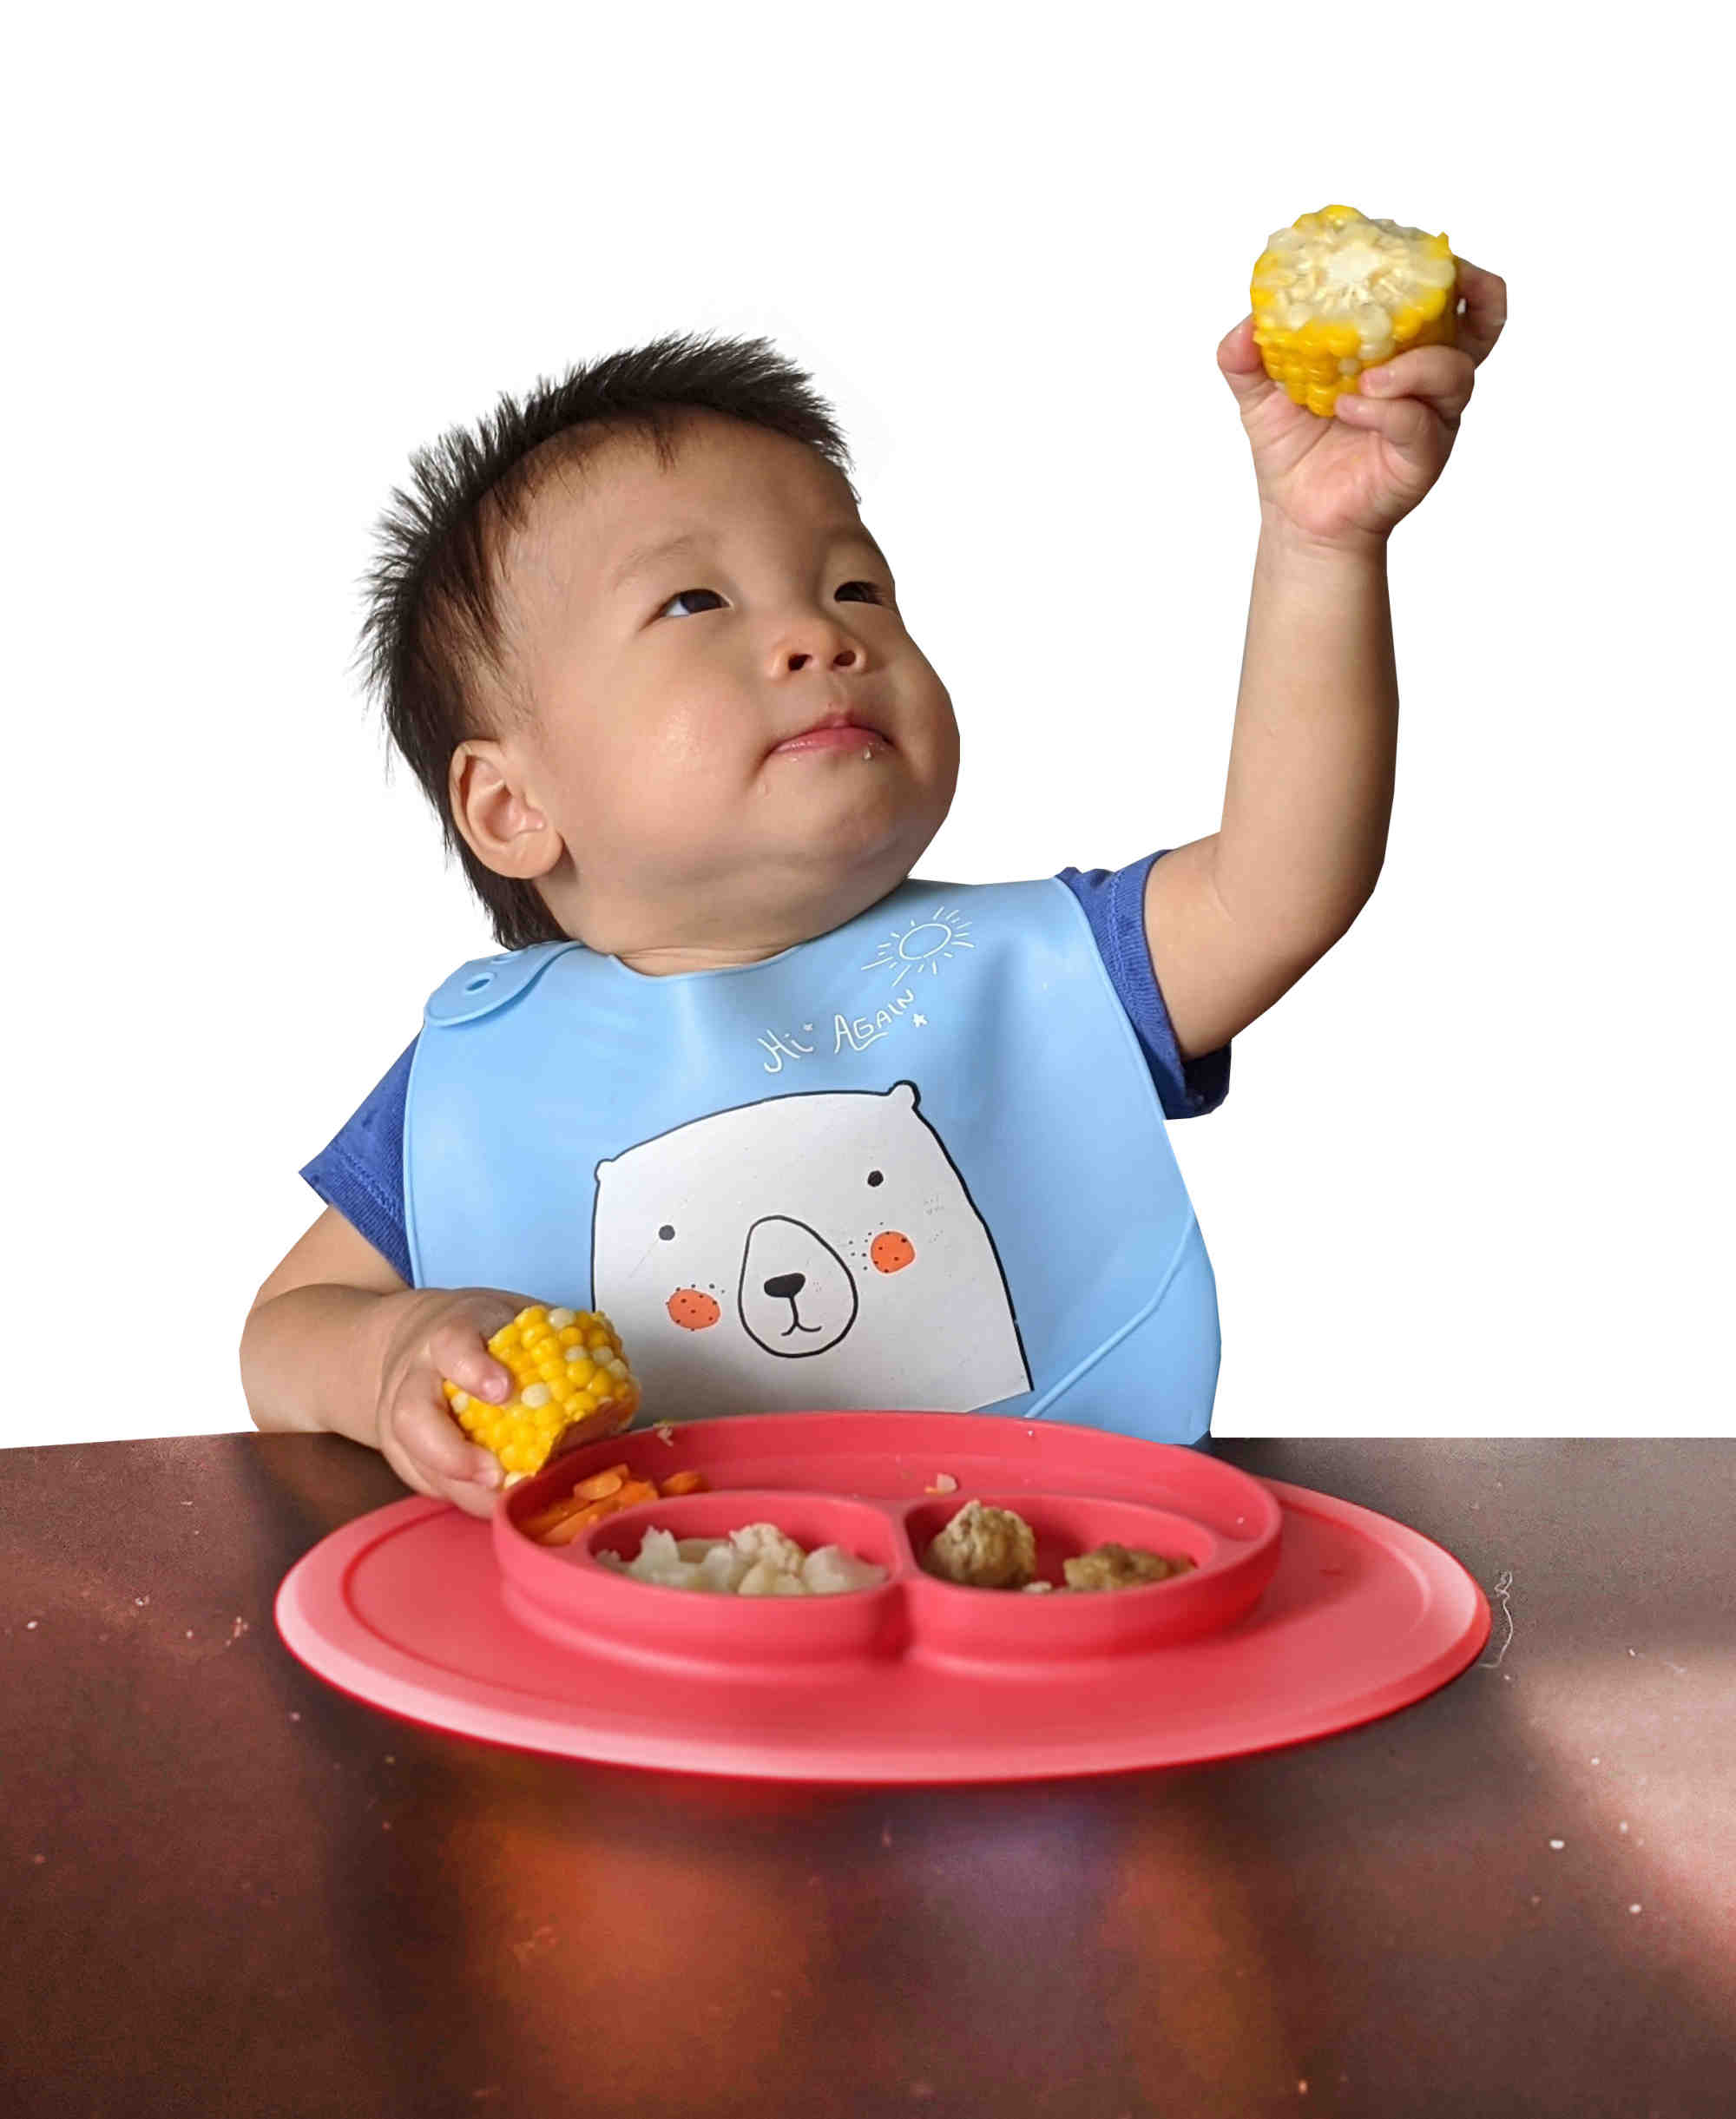 Is Your Baby Ready to Eat Solid Food? - Children's Medical